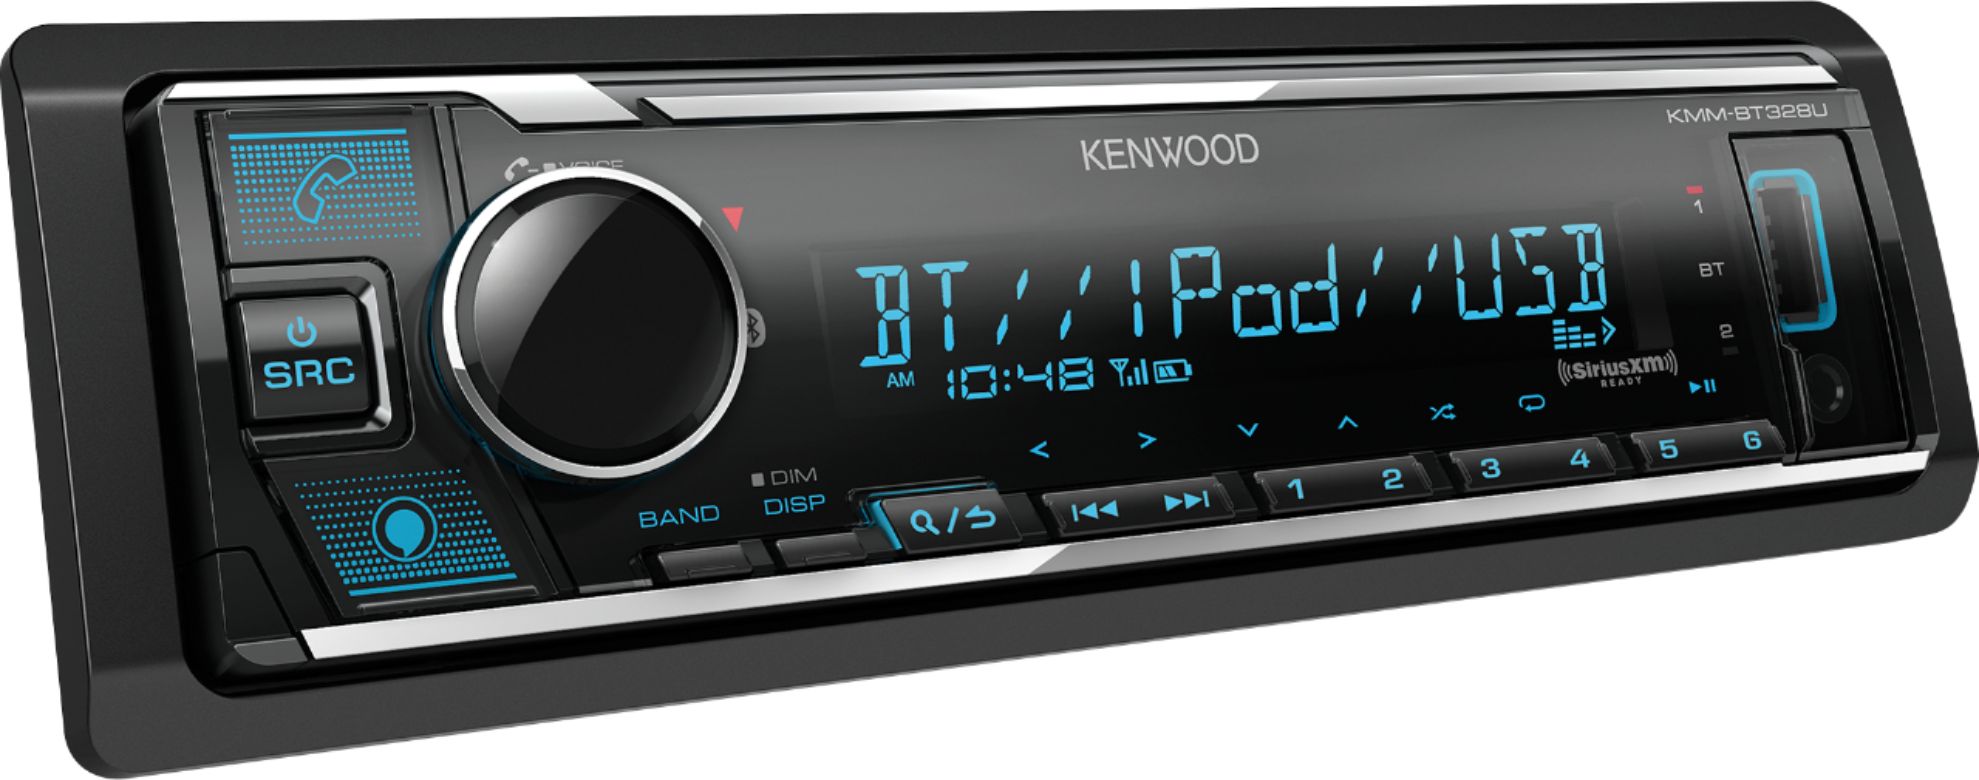 Angle View: Kenwood - In-Dash Digital Media Receiver - Built-in Bluetooth - Satellite Radio-ready with Detachable Faceplate - Black